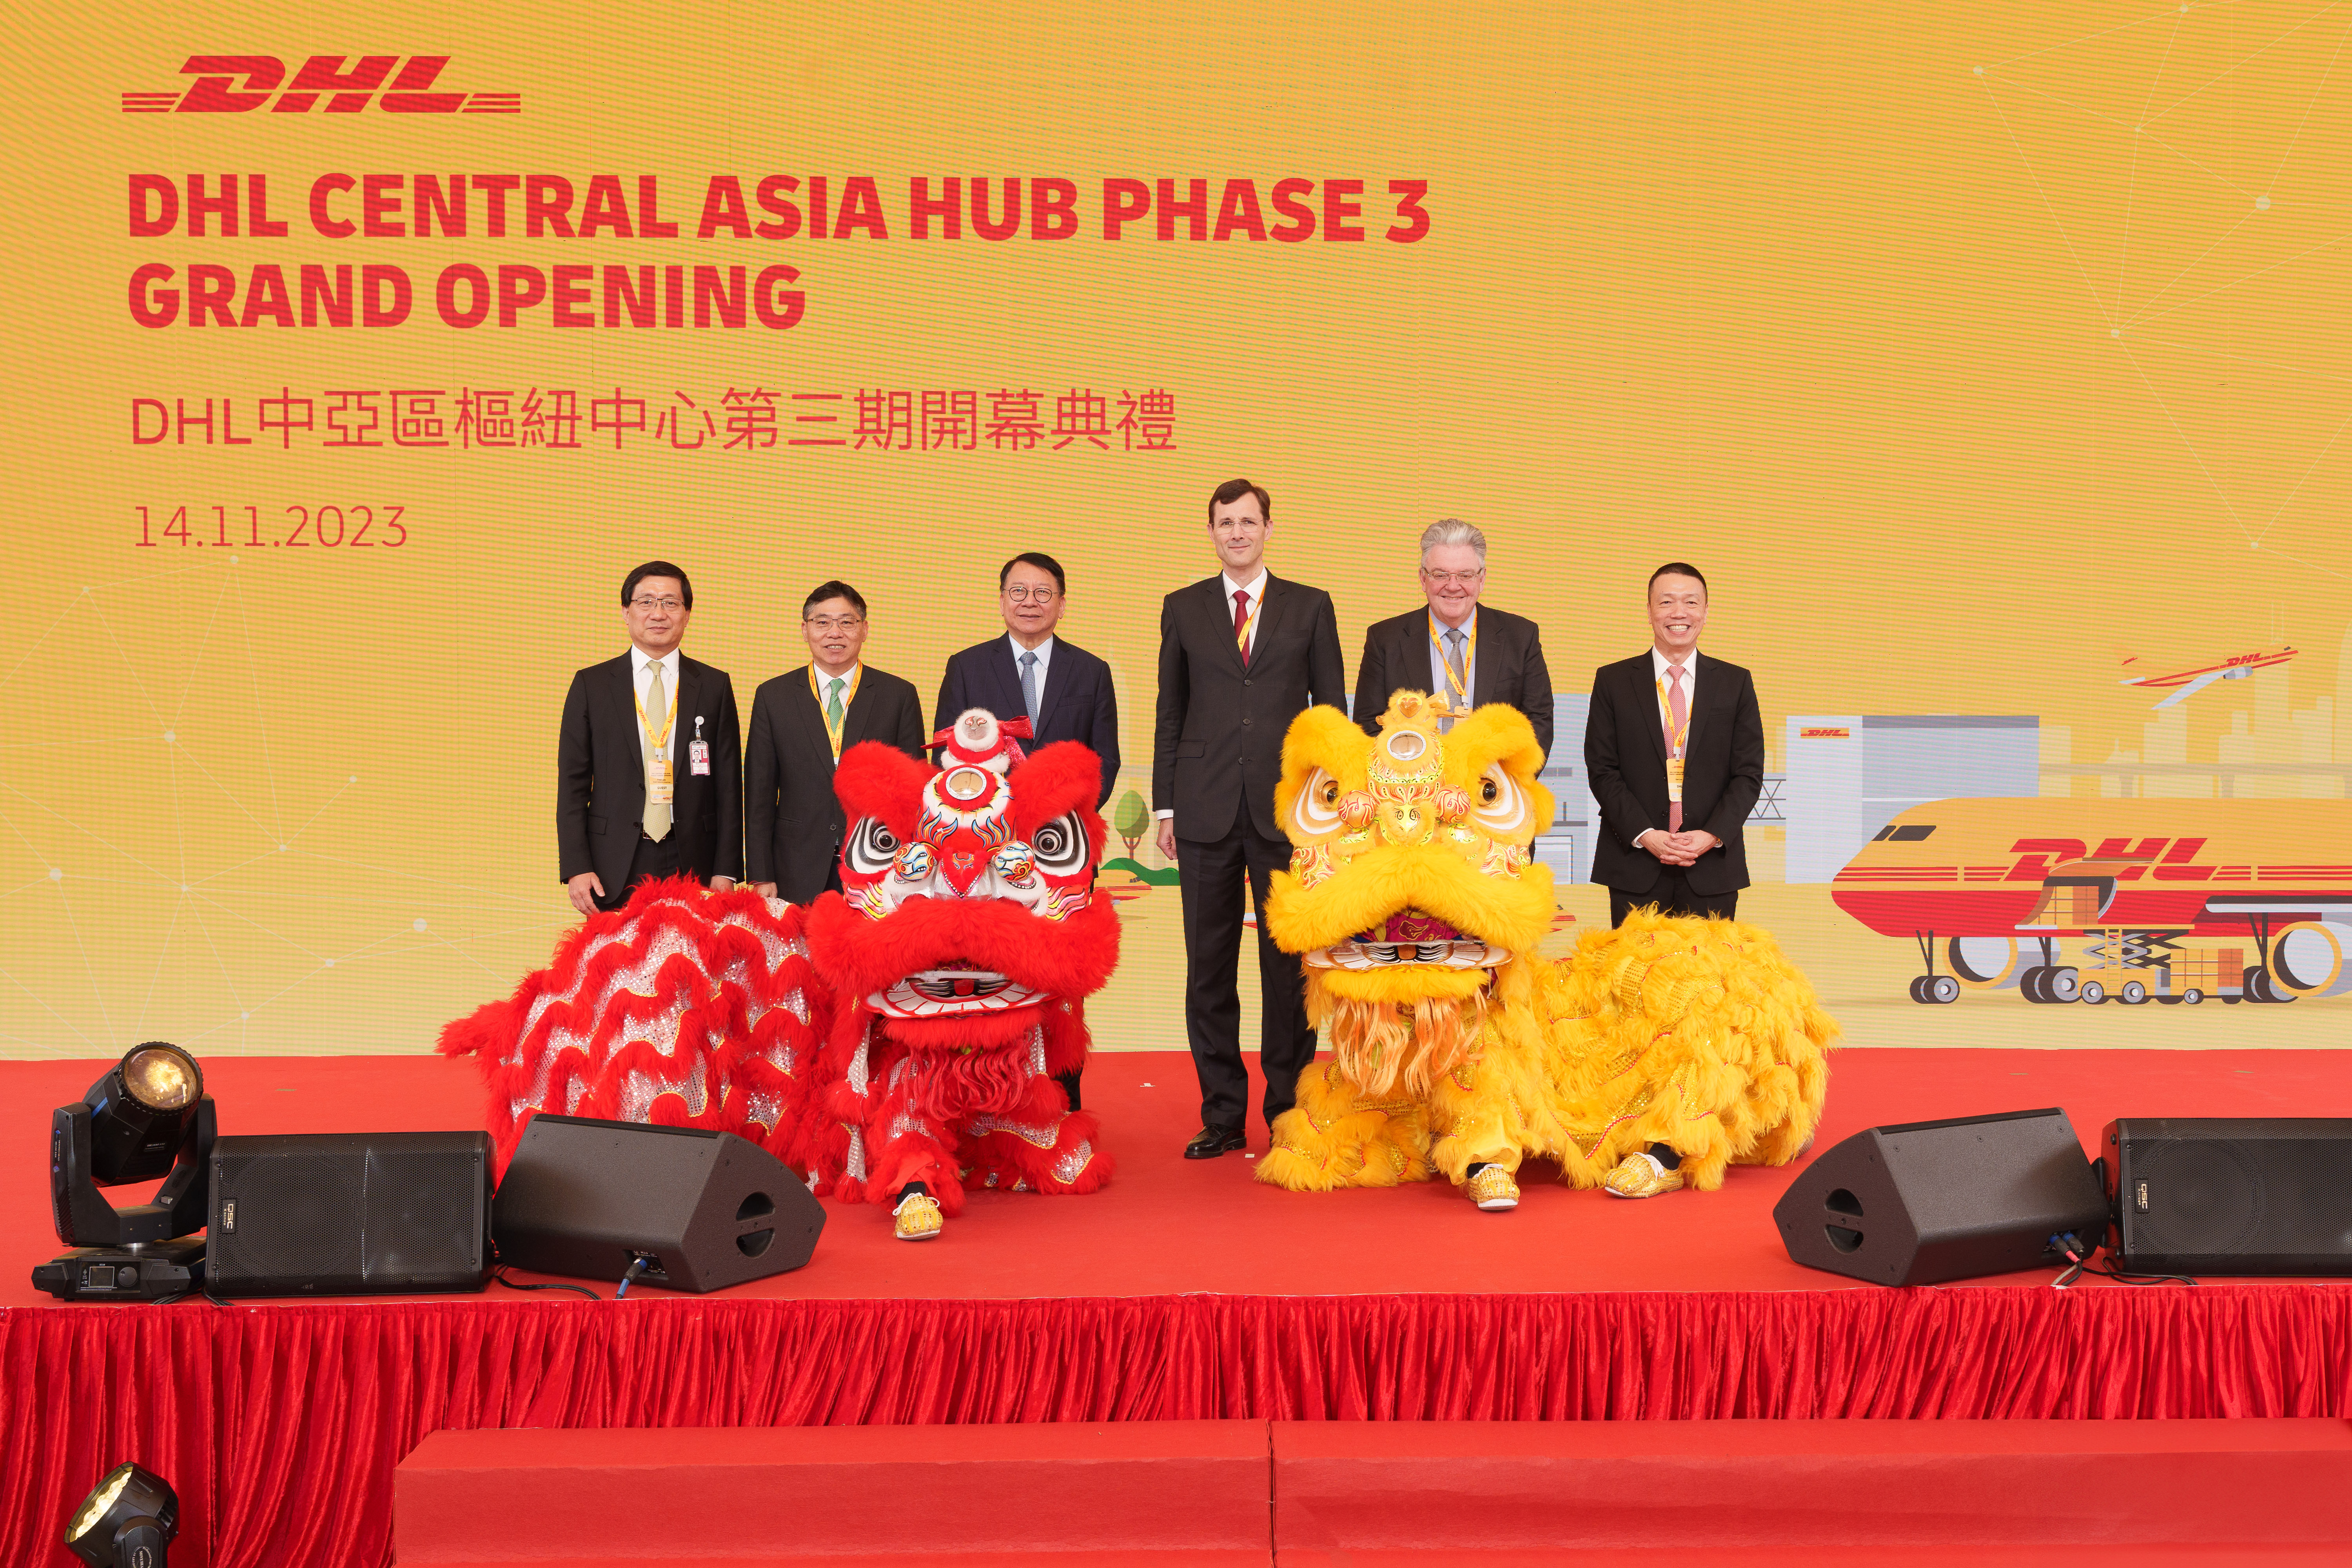 KK Chan, Chief Secretary for Administration of the Government of the Hong Kong Special Administrative, Guest of Honor (third from left) and officiating guests at the lion dance eye-dotting ceremony to mark the opening of the DHL Central Asia Hub expansion, demonstrating DHL's commitment to supporting customers' international growth. Officiating guests include: Lam Sai-hung, Secretary for Transport and Logistics of the Government of the Hong Kong Special Administrative (second from left);Fred Lam, CEO of Airport Authority Hong Kong (first from left);Tobias Meyer, CEO of DHL Group (third from right);John Pearson, CEO of DHL Express (second from right); andKen Lee, CEO of DHL Express Asia Pacific (first from right). Officiating guests are captured in a moment with a DHL aircraft on the airside of the expanded Central Asia Hub in Hong Kong. With direct access to airside and landside, CAH is currently the only dedicated and purpose-built air express cargo facility in the Hong Kong International Airport